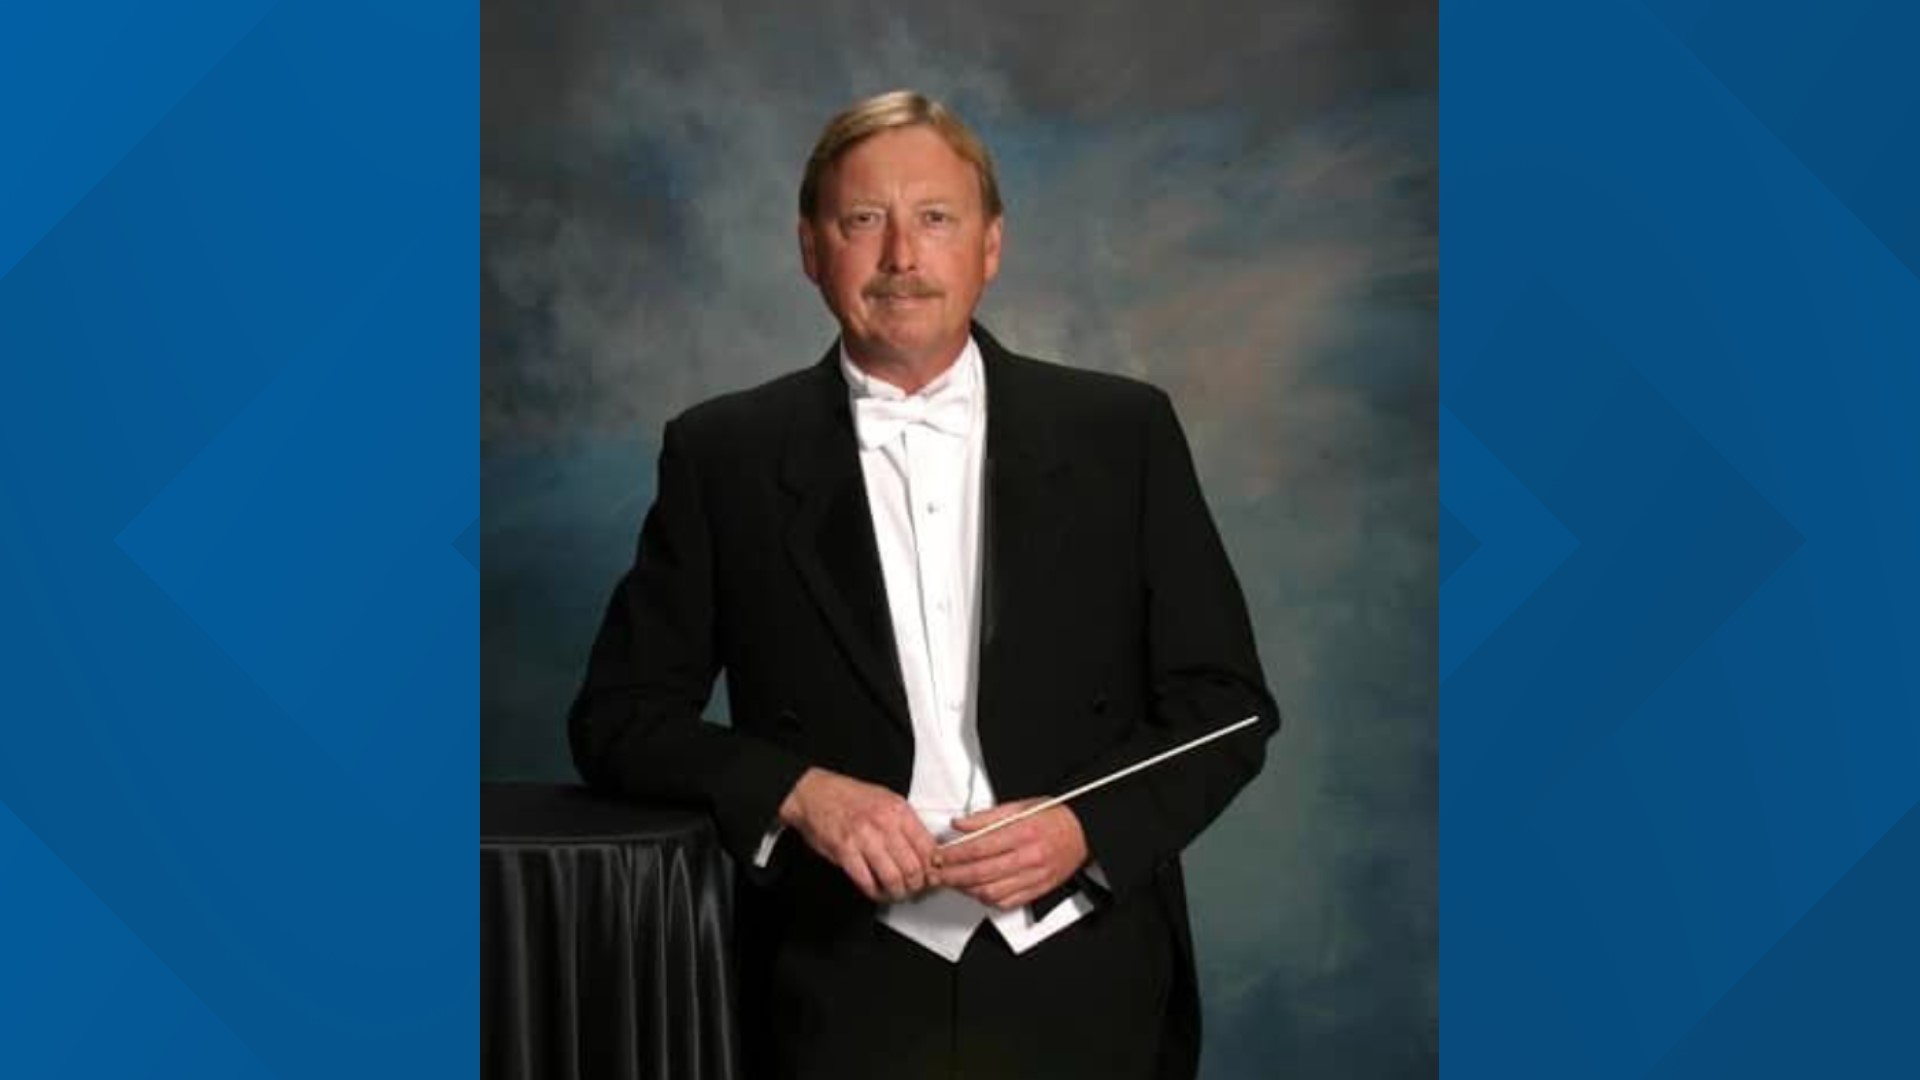 Dr. Keith Graumann will be honored this year at the Spring Pop Concert and his contributions to the performing arts culture in West Texas.